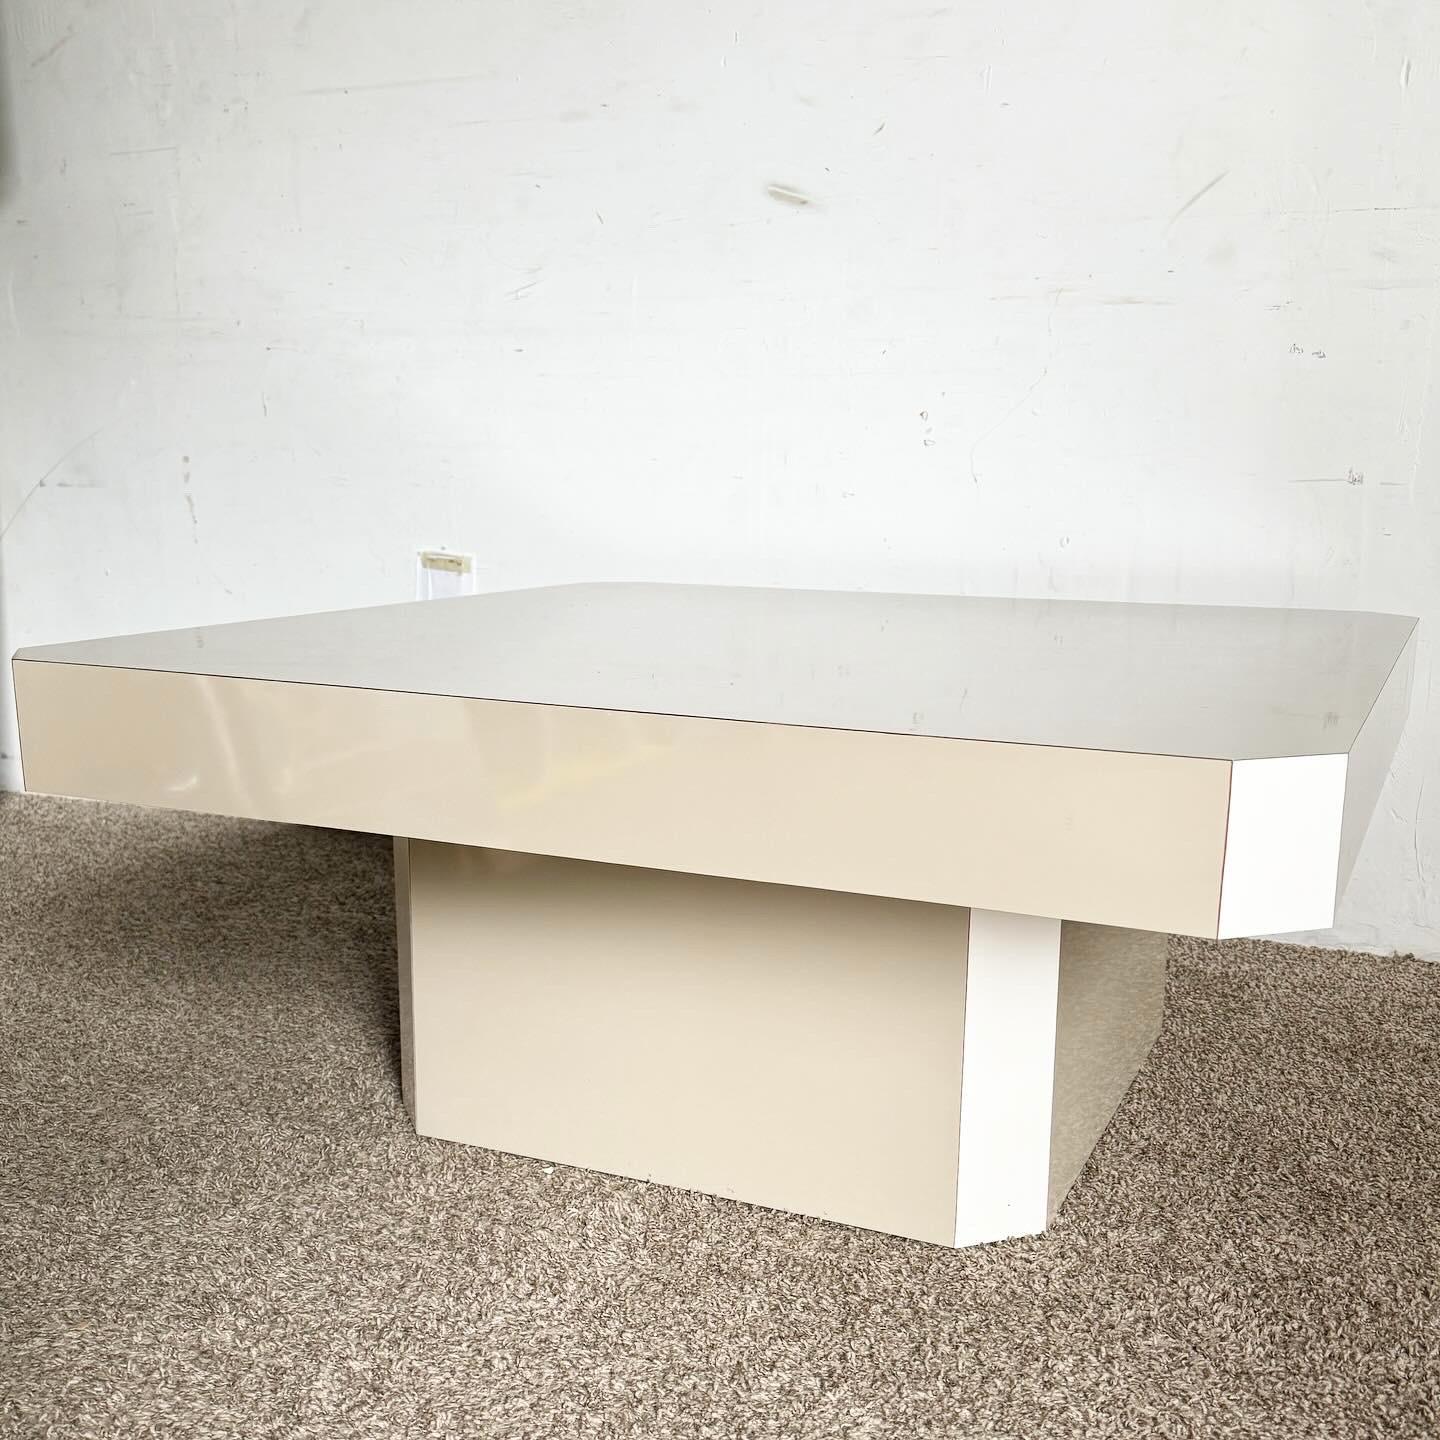 Introducing the Postmodern Tan and White Lacquer Laminate Coffee Table - a perfect blend of functionality and style for modern interiors. This coffee table features a high-quality lacquer finish in tan and white, offering durability and a chic look.